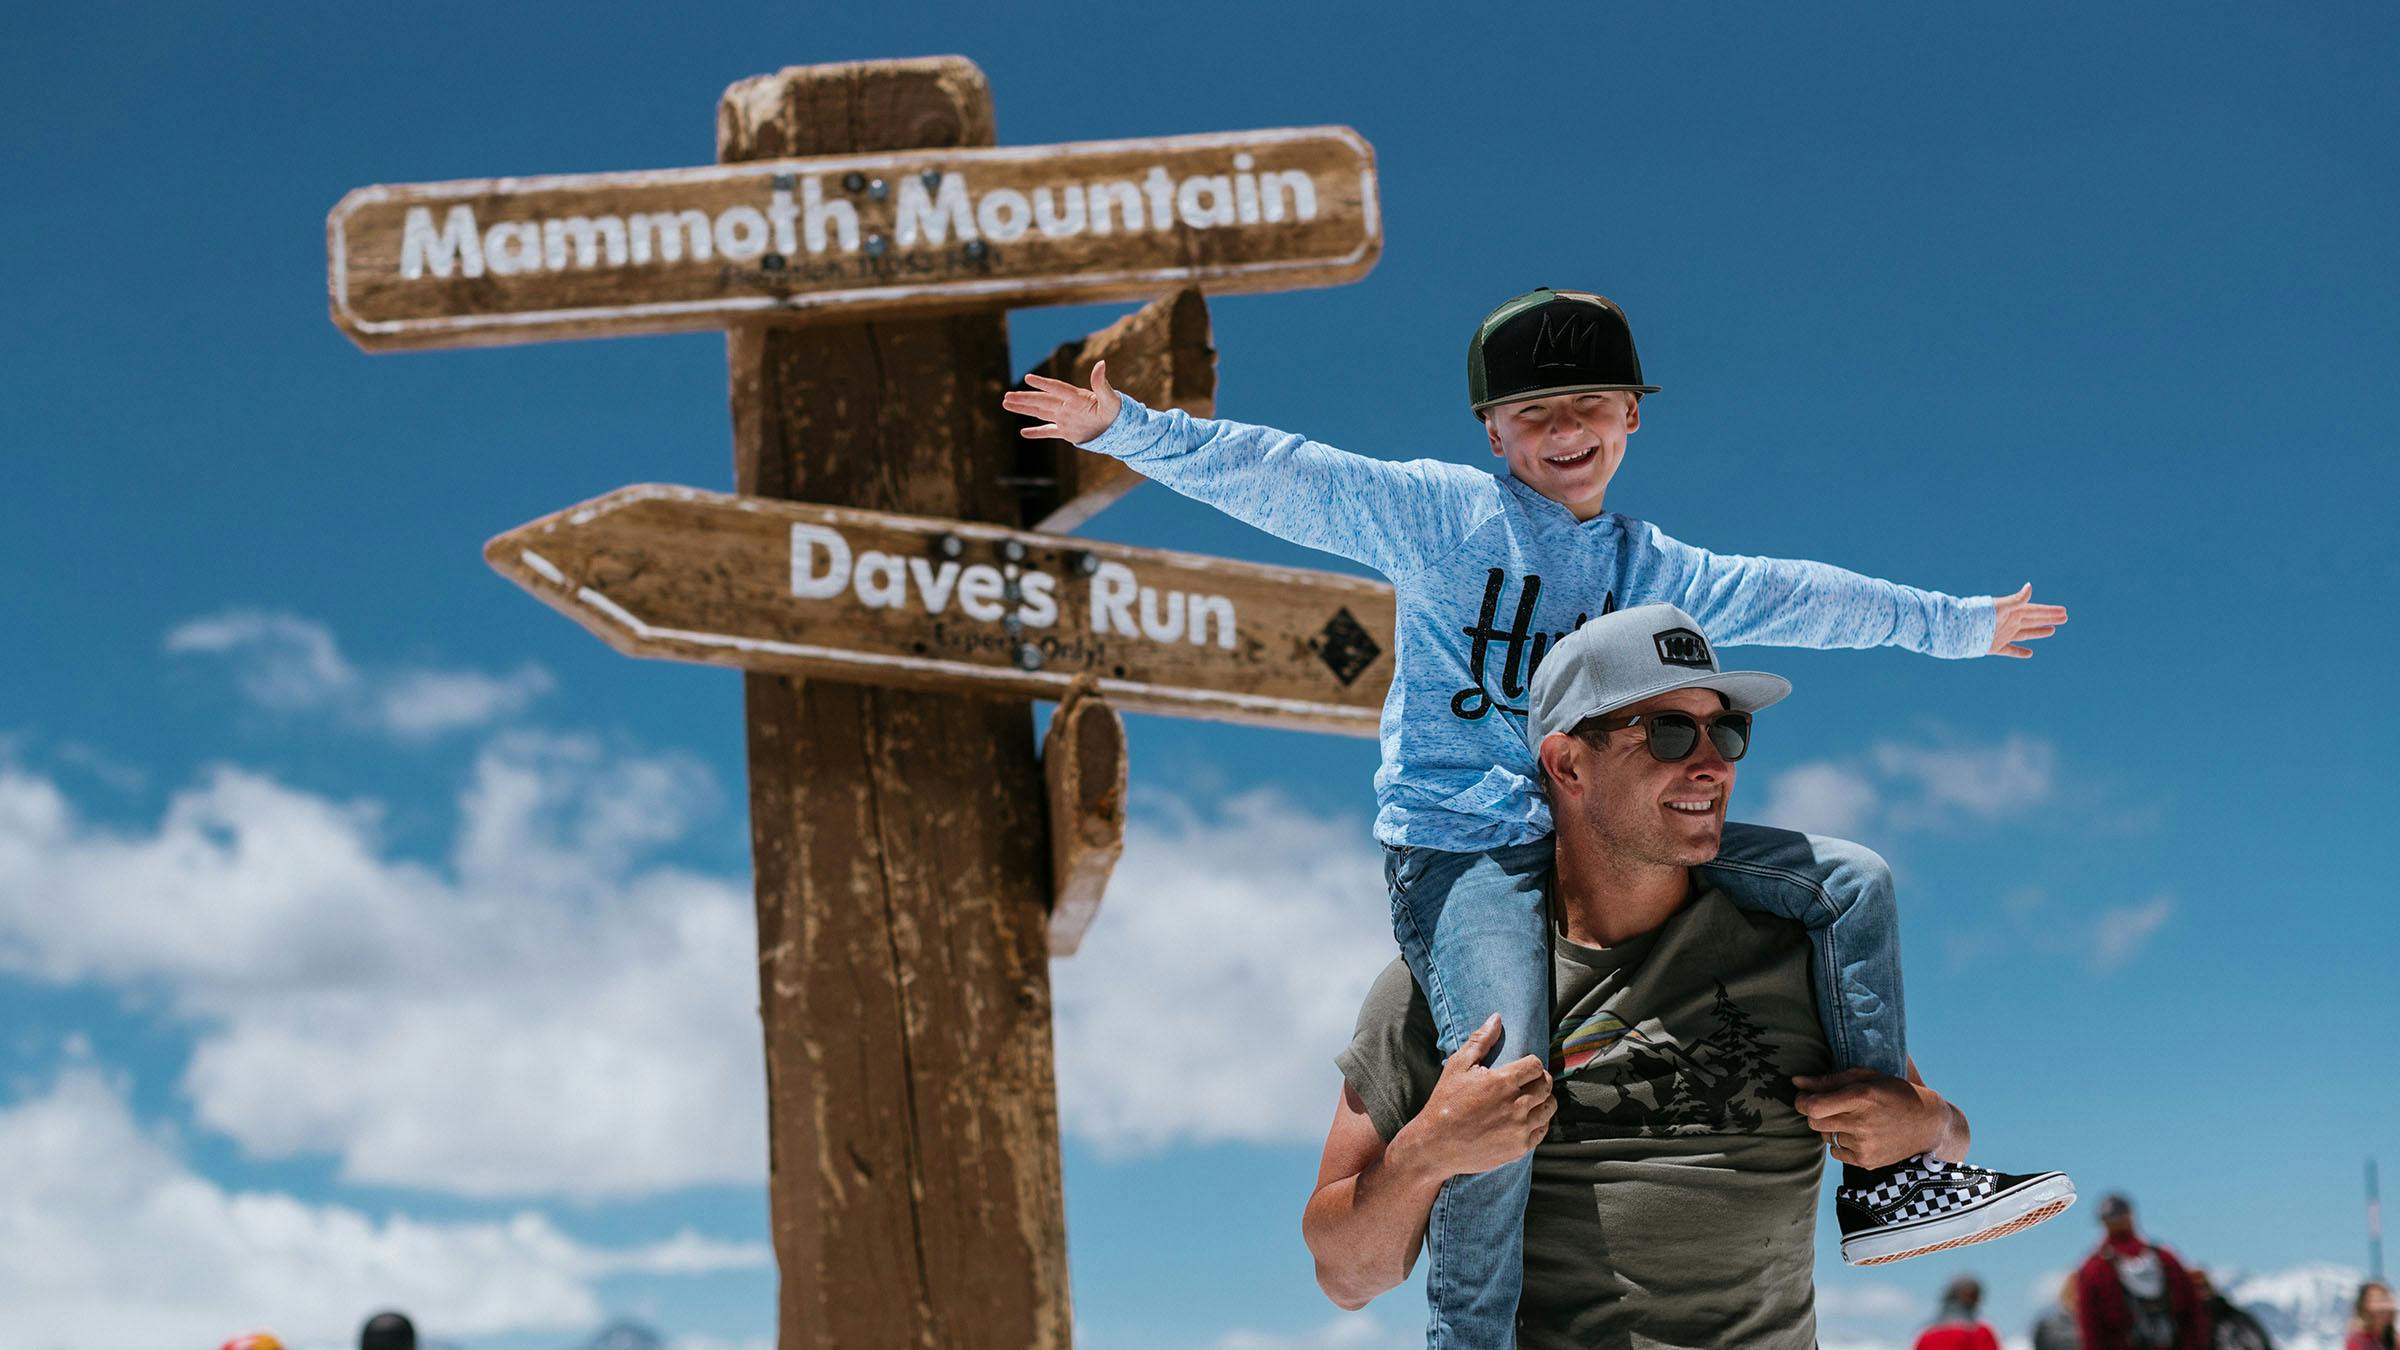 Boy on father's shoulders with outstretched arms in front of Mammoth Mountain summit sign